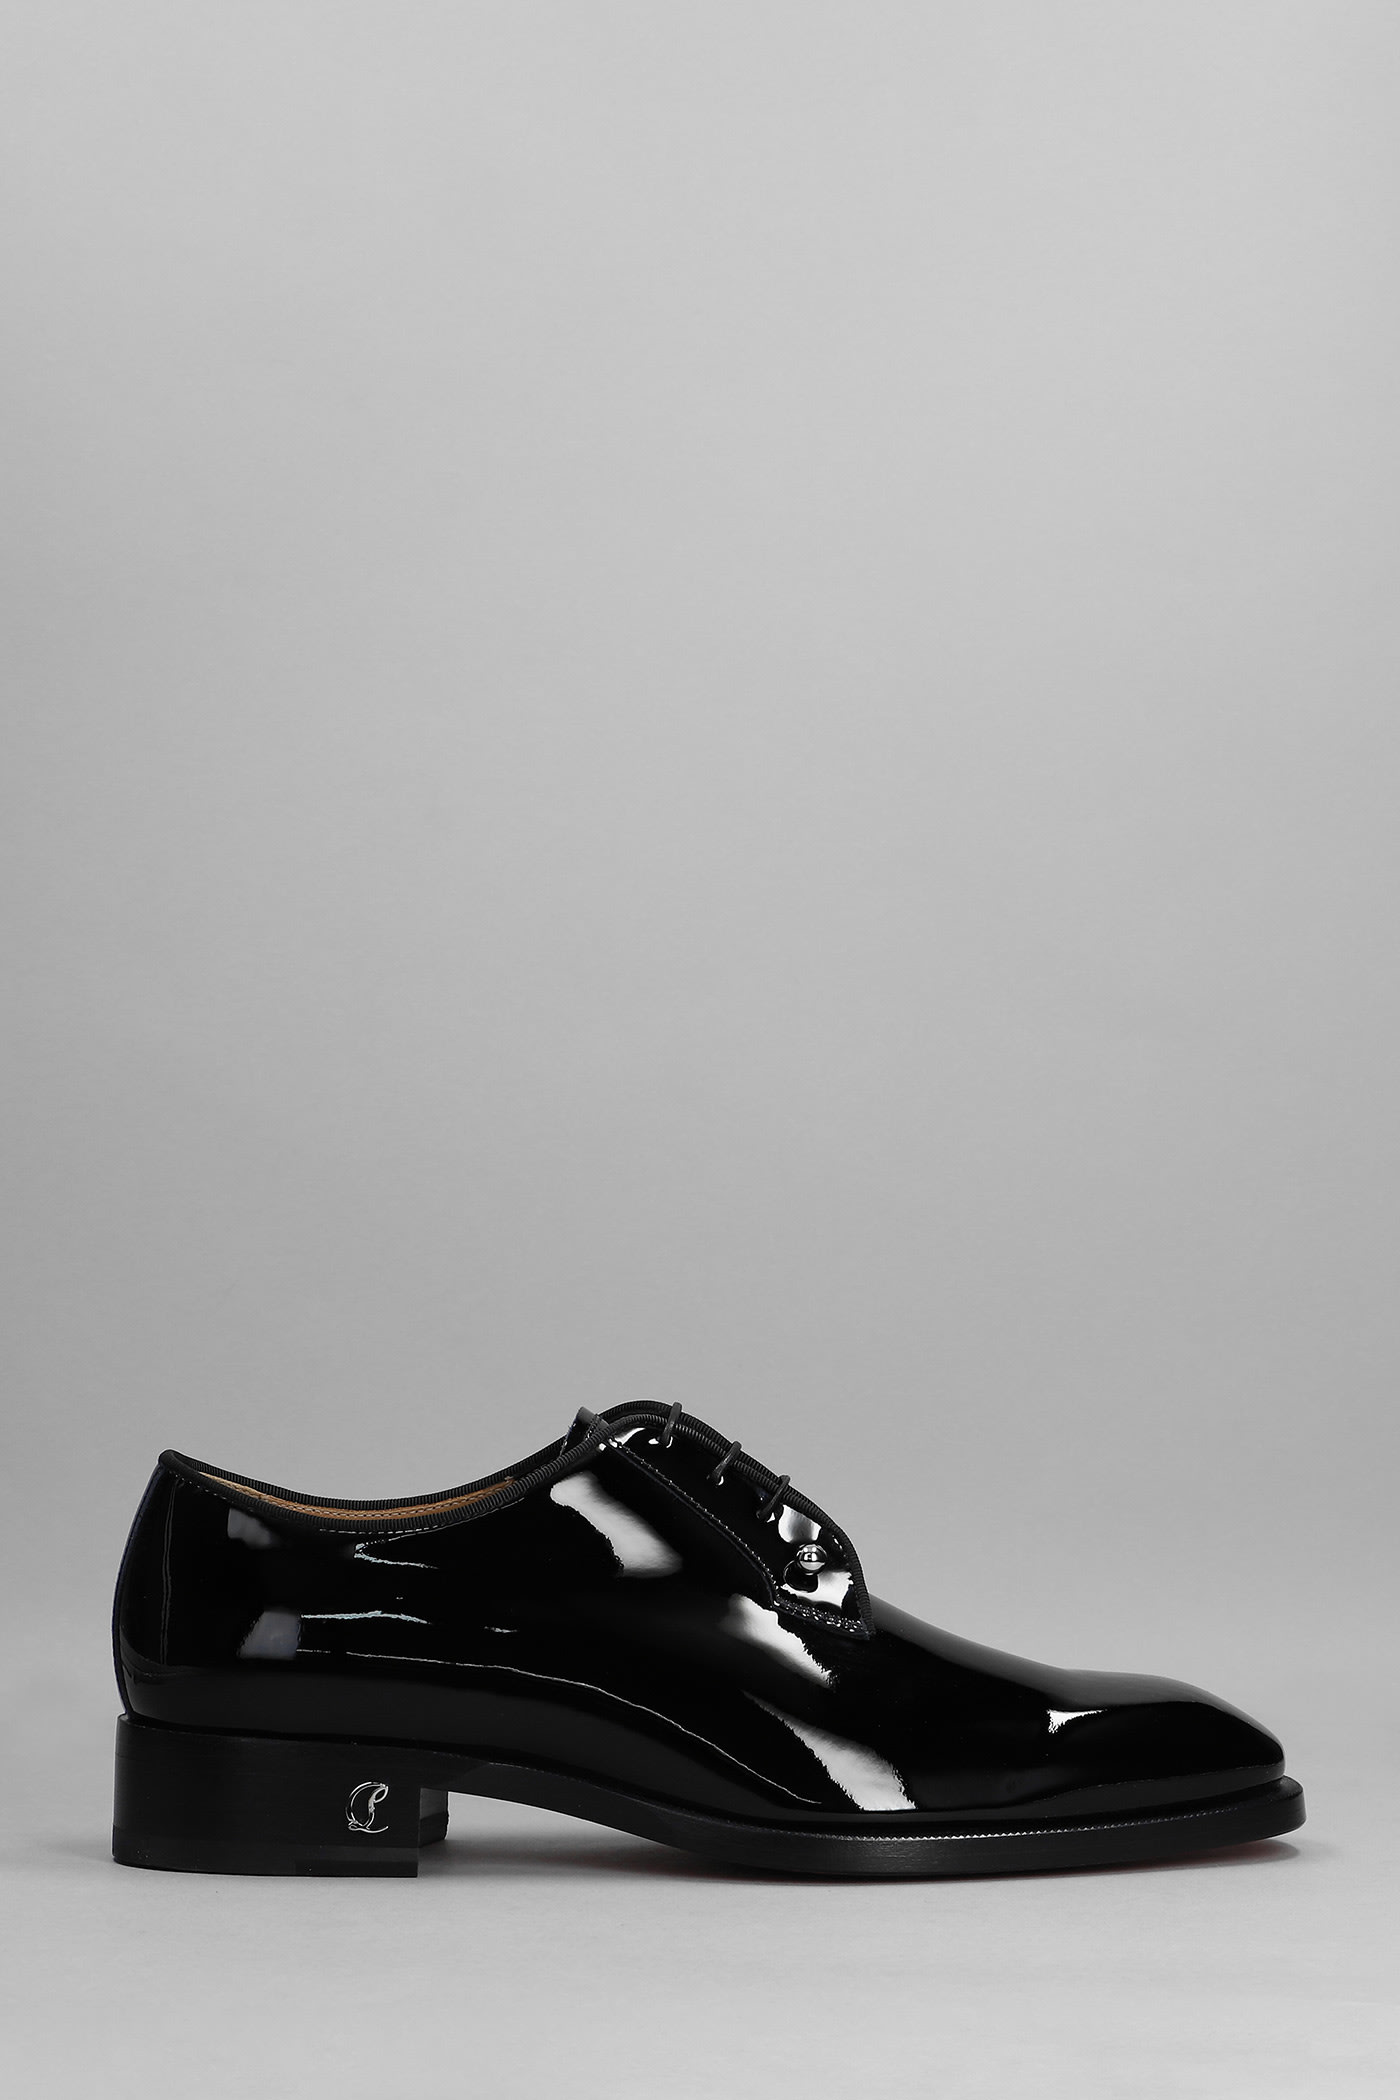 CHRISTIAN LOUBOUTIN CHAMBELISS LACE UP SHOES IN BLACK PATENT LEATHER